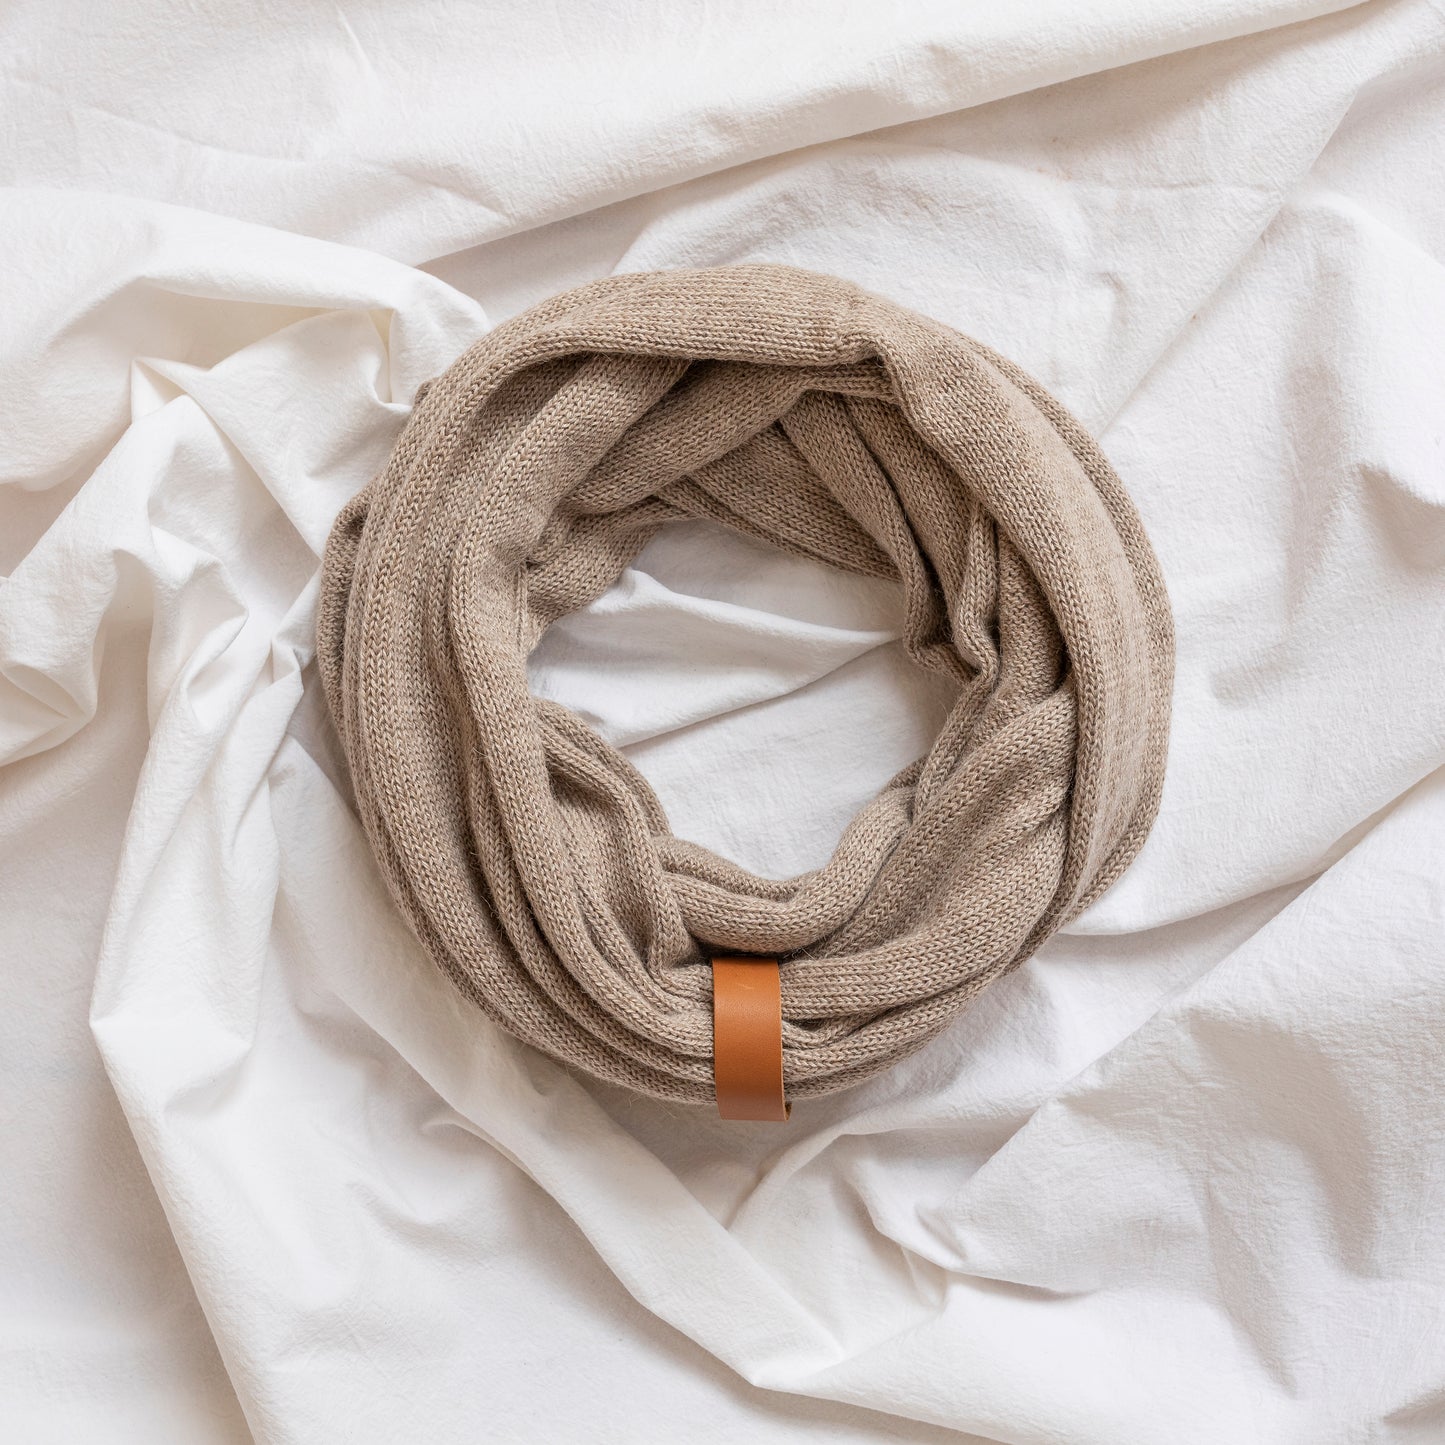 Oatmeal coloured luxury infinity scarf with leather strap detail.